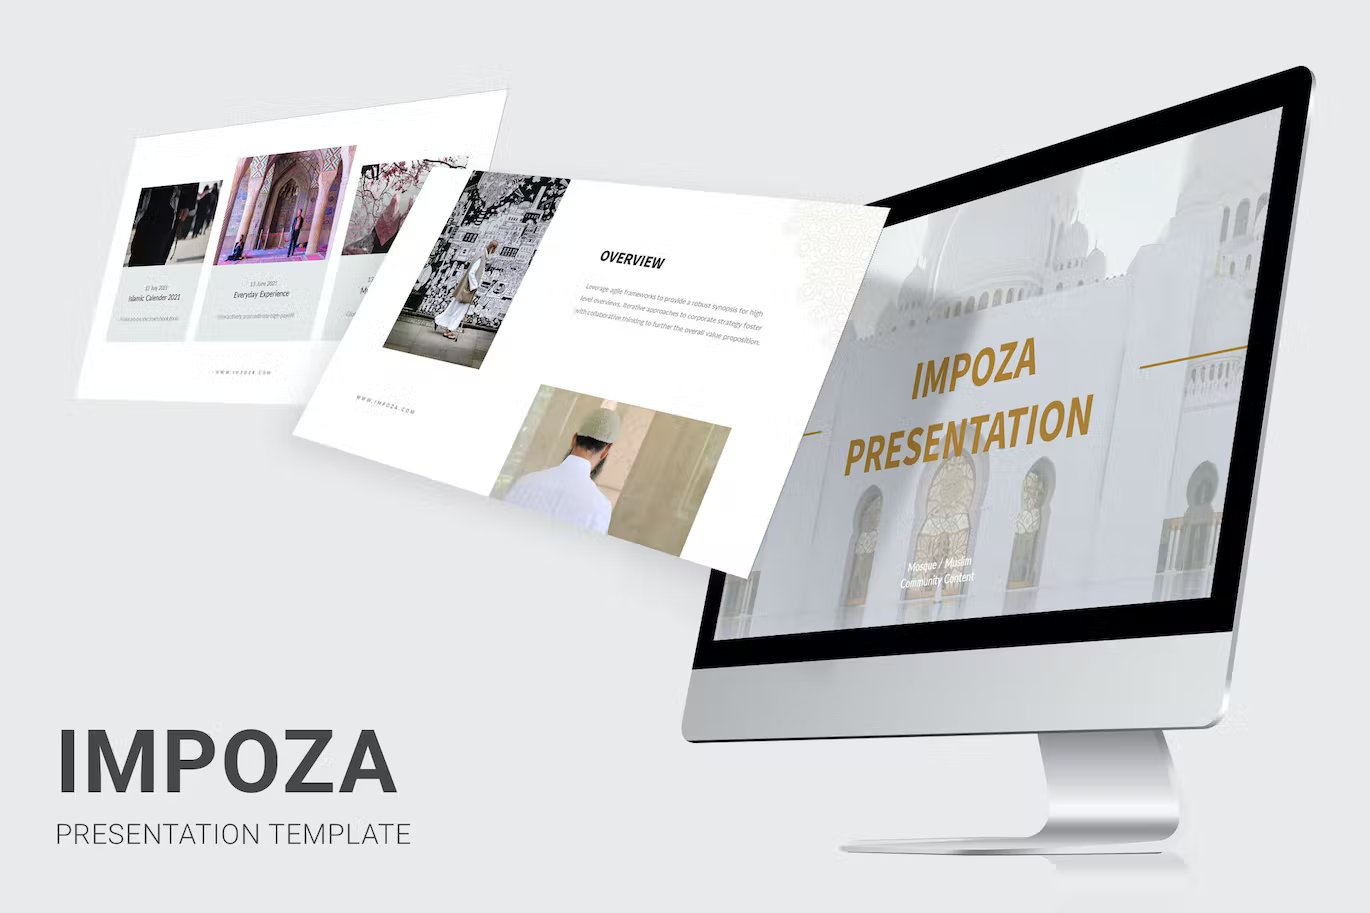 Black lettering "Impoza Presentation Template" and mockup IMac with different presentation templates on a gray background.